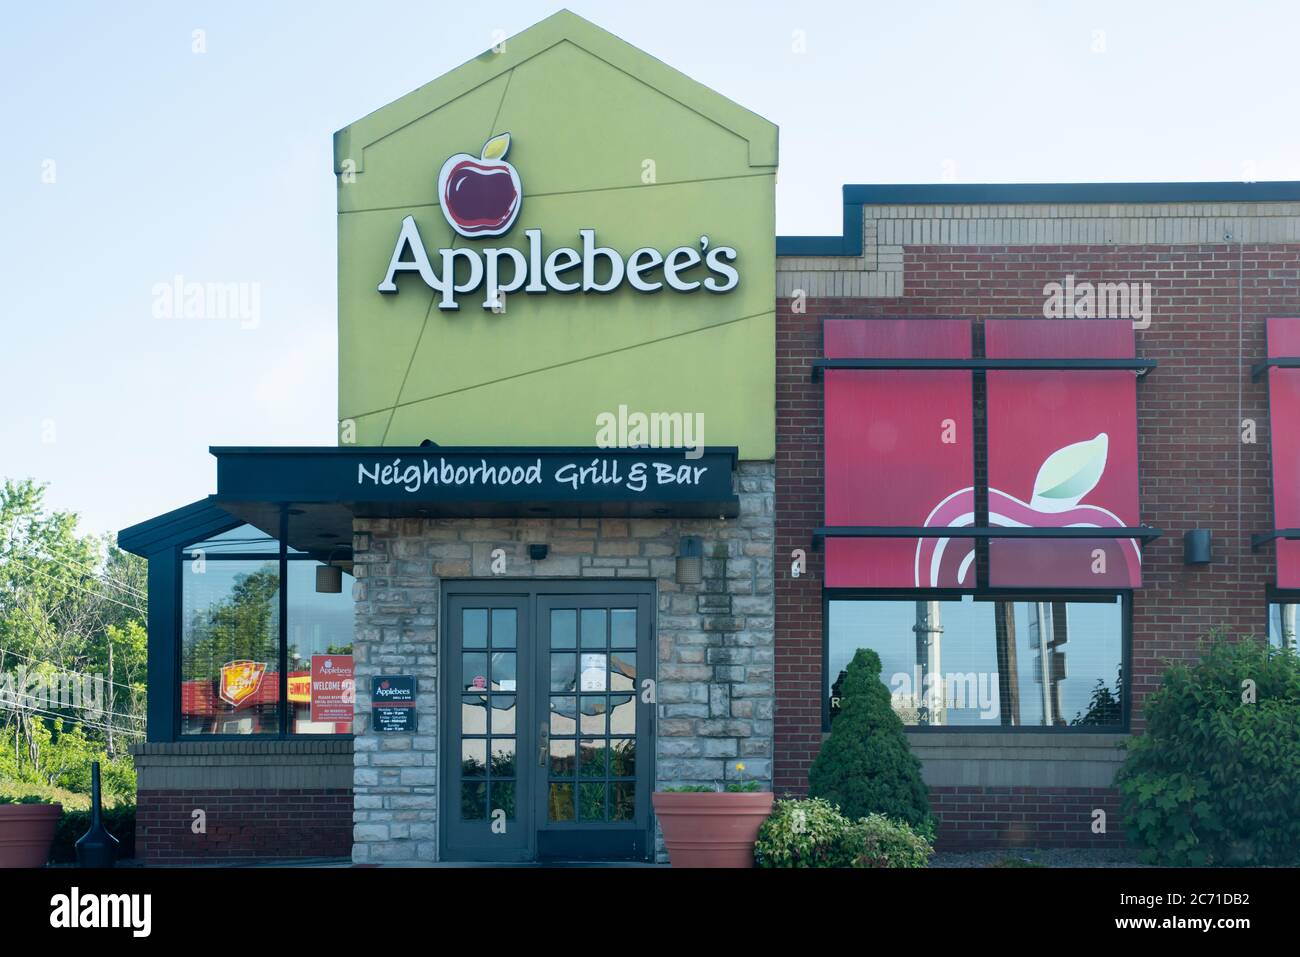 Outside view of an Applebee's neighborhood grill and bar Stock Photo